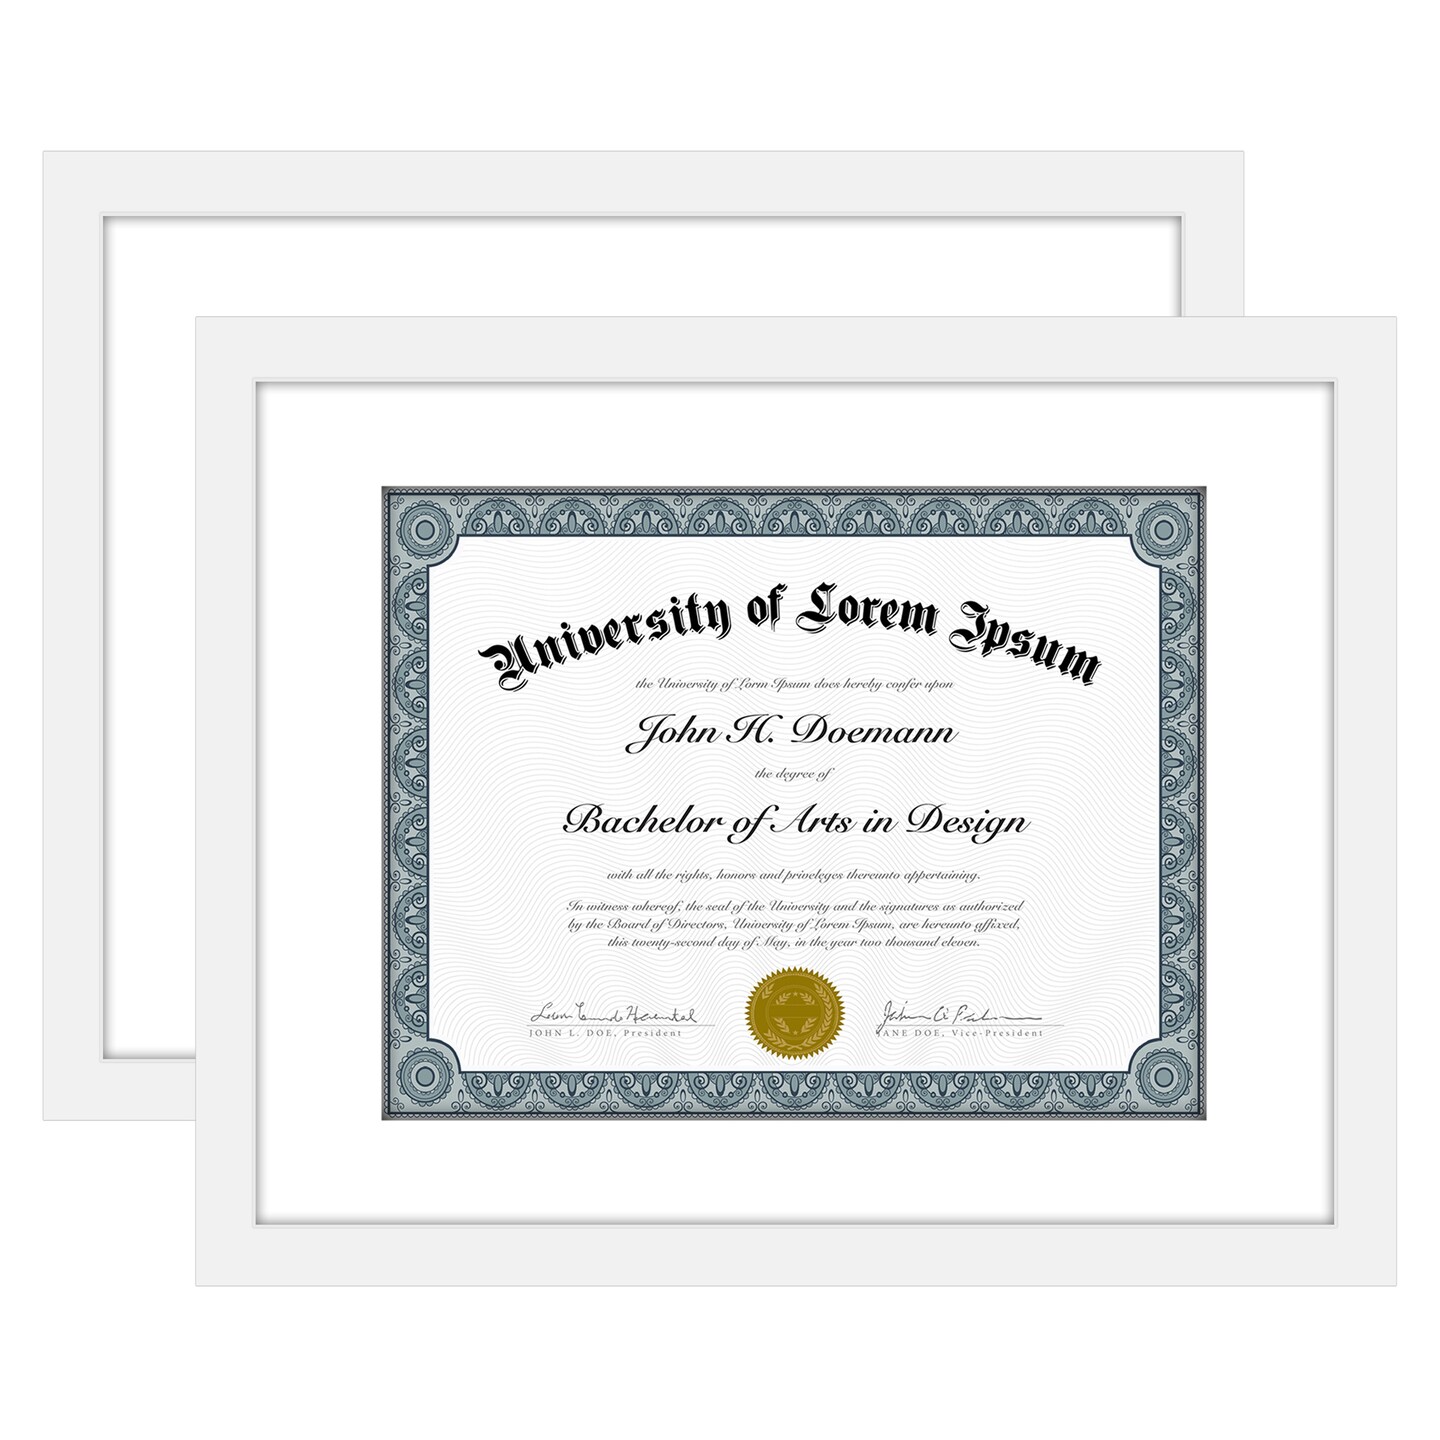 Americanflat 11x14 Diploma Frame - 8.5x11 with Mat or 11x14 without Mat - Certificate Frame for Displaying Documentation - Shatter Resistant Glass - Hanging Hardware